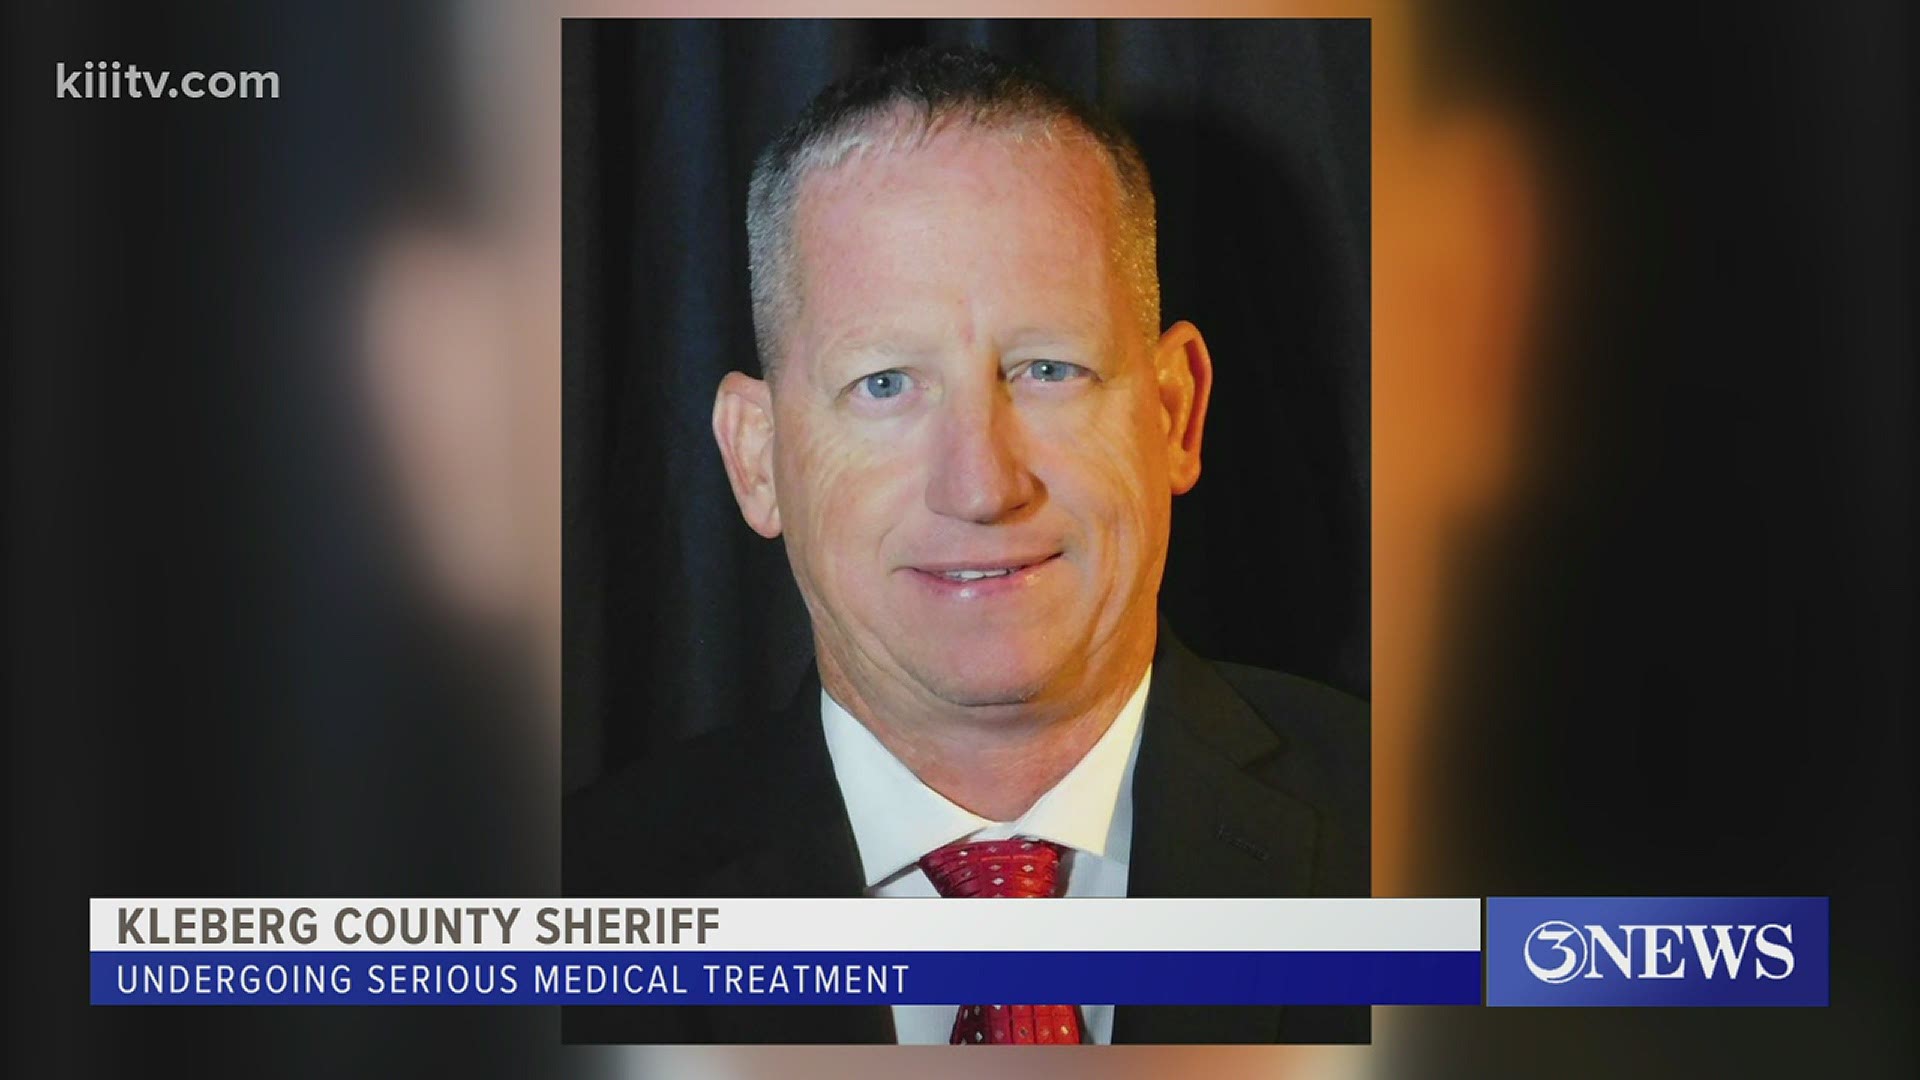 Officials said an unexpected medical event occurred on Sunday evening, which hospitalized Sheriff Kirkpatrick.